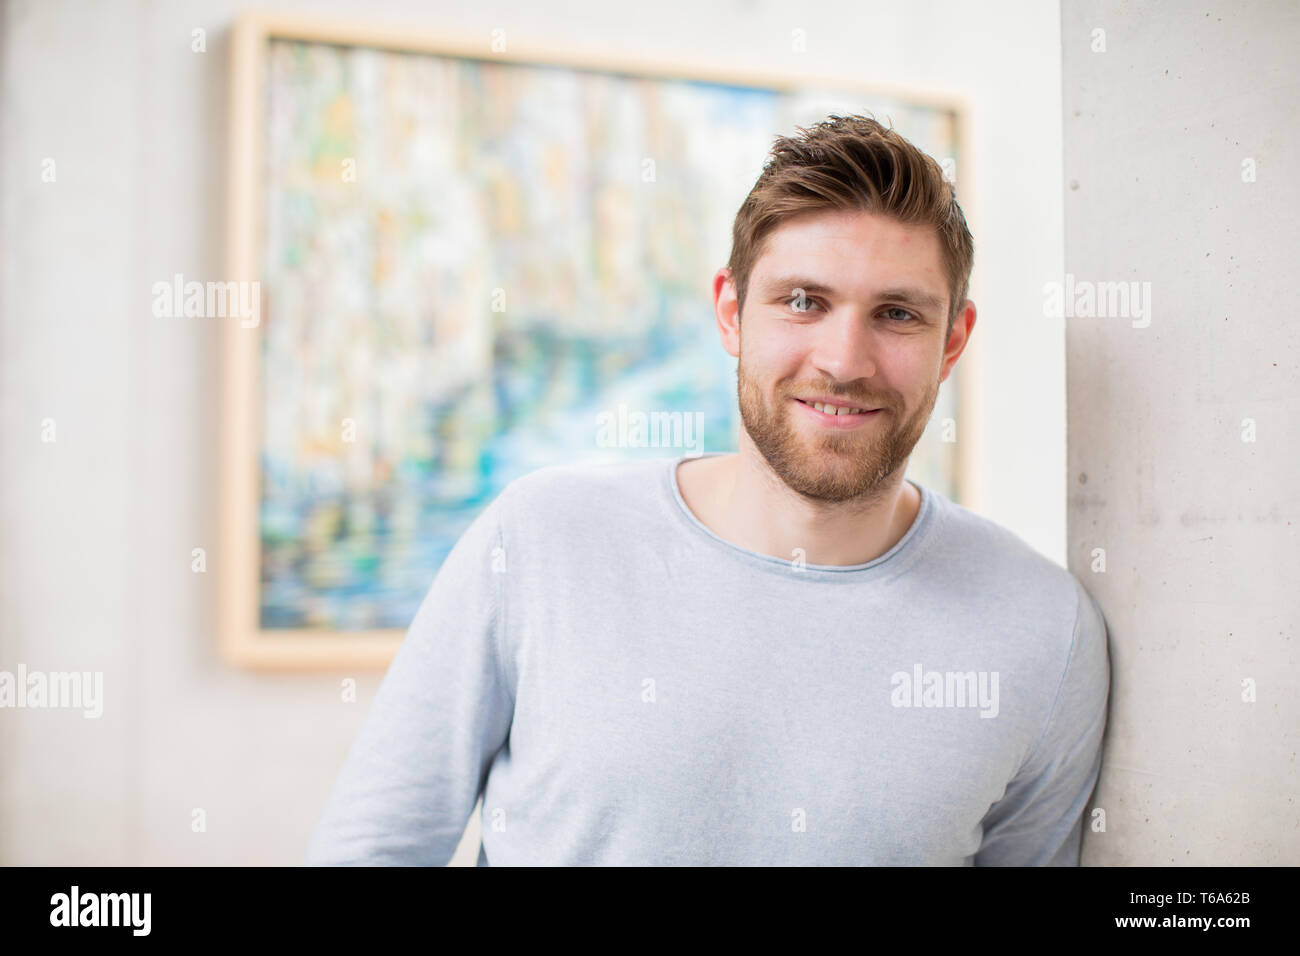 Leon draisaitl hi-res stock photography and images - Alamy